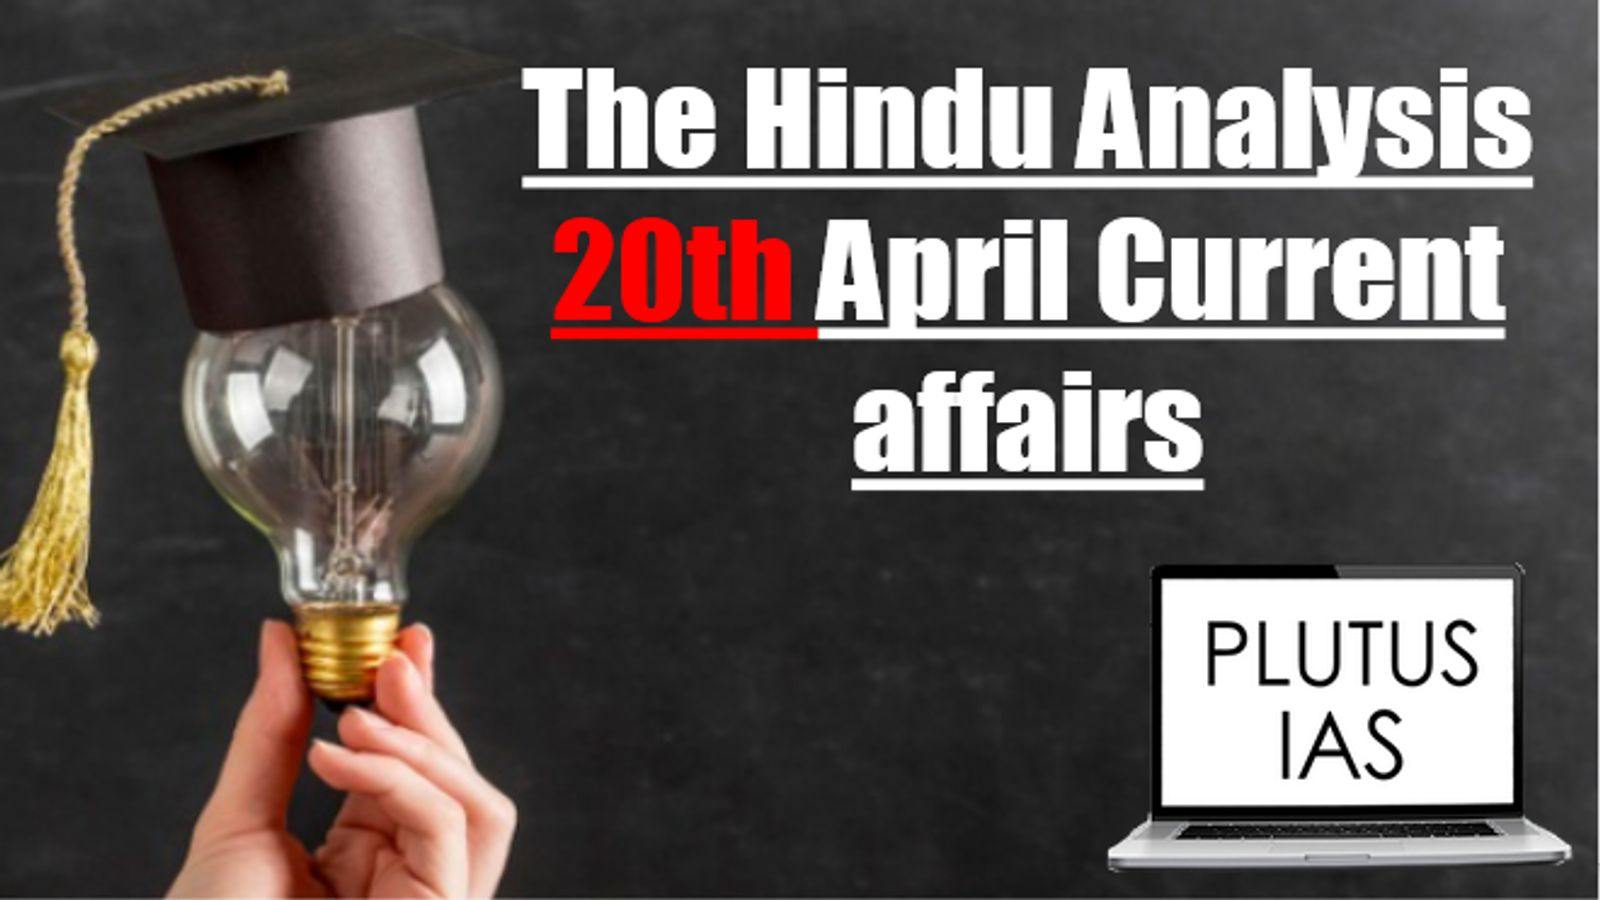 Today Current Affairs 20th April